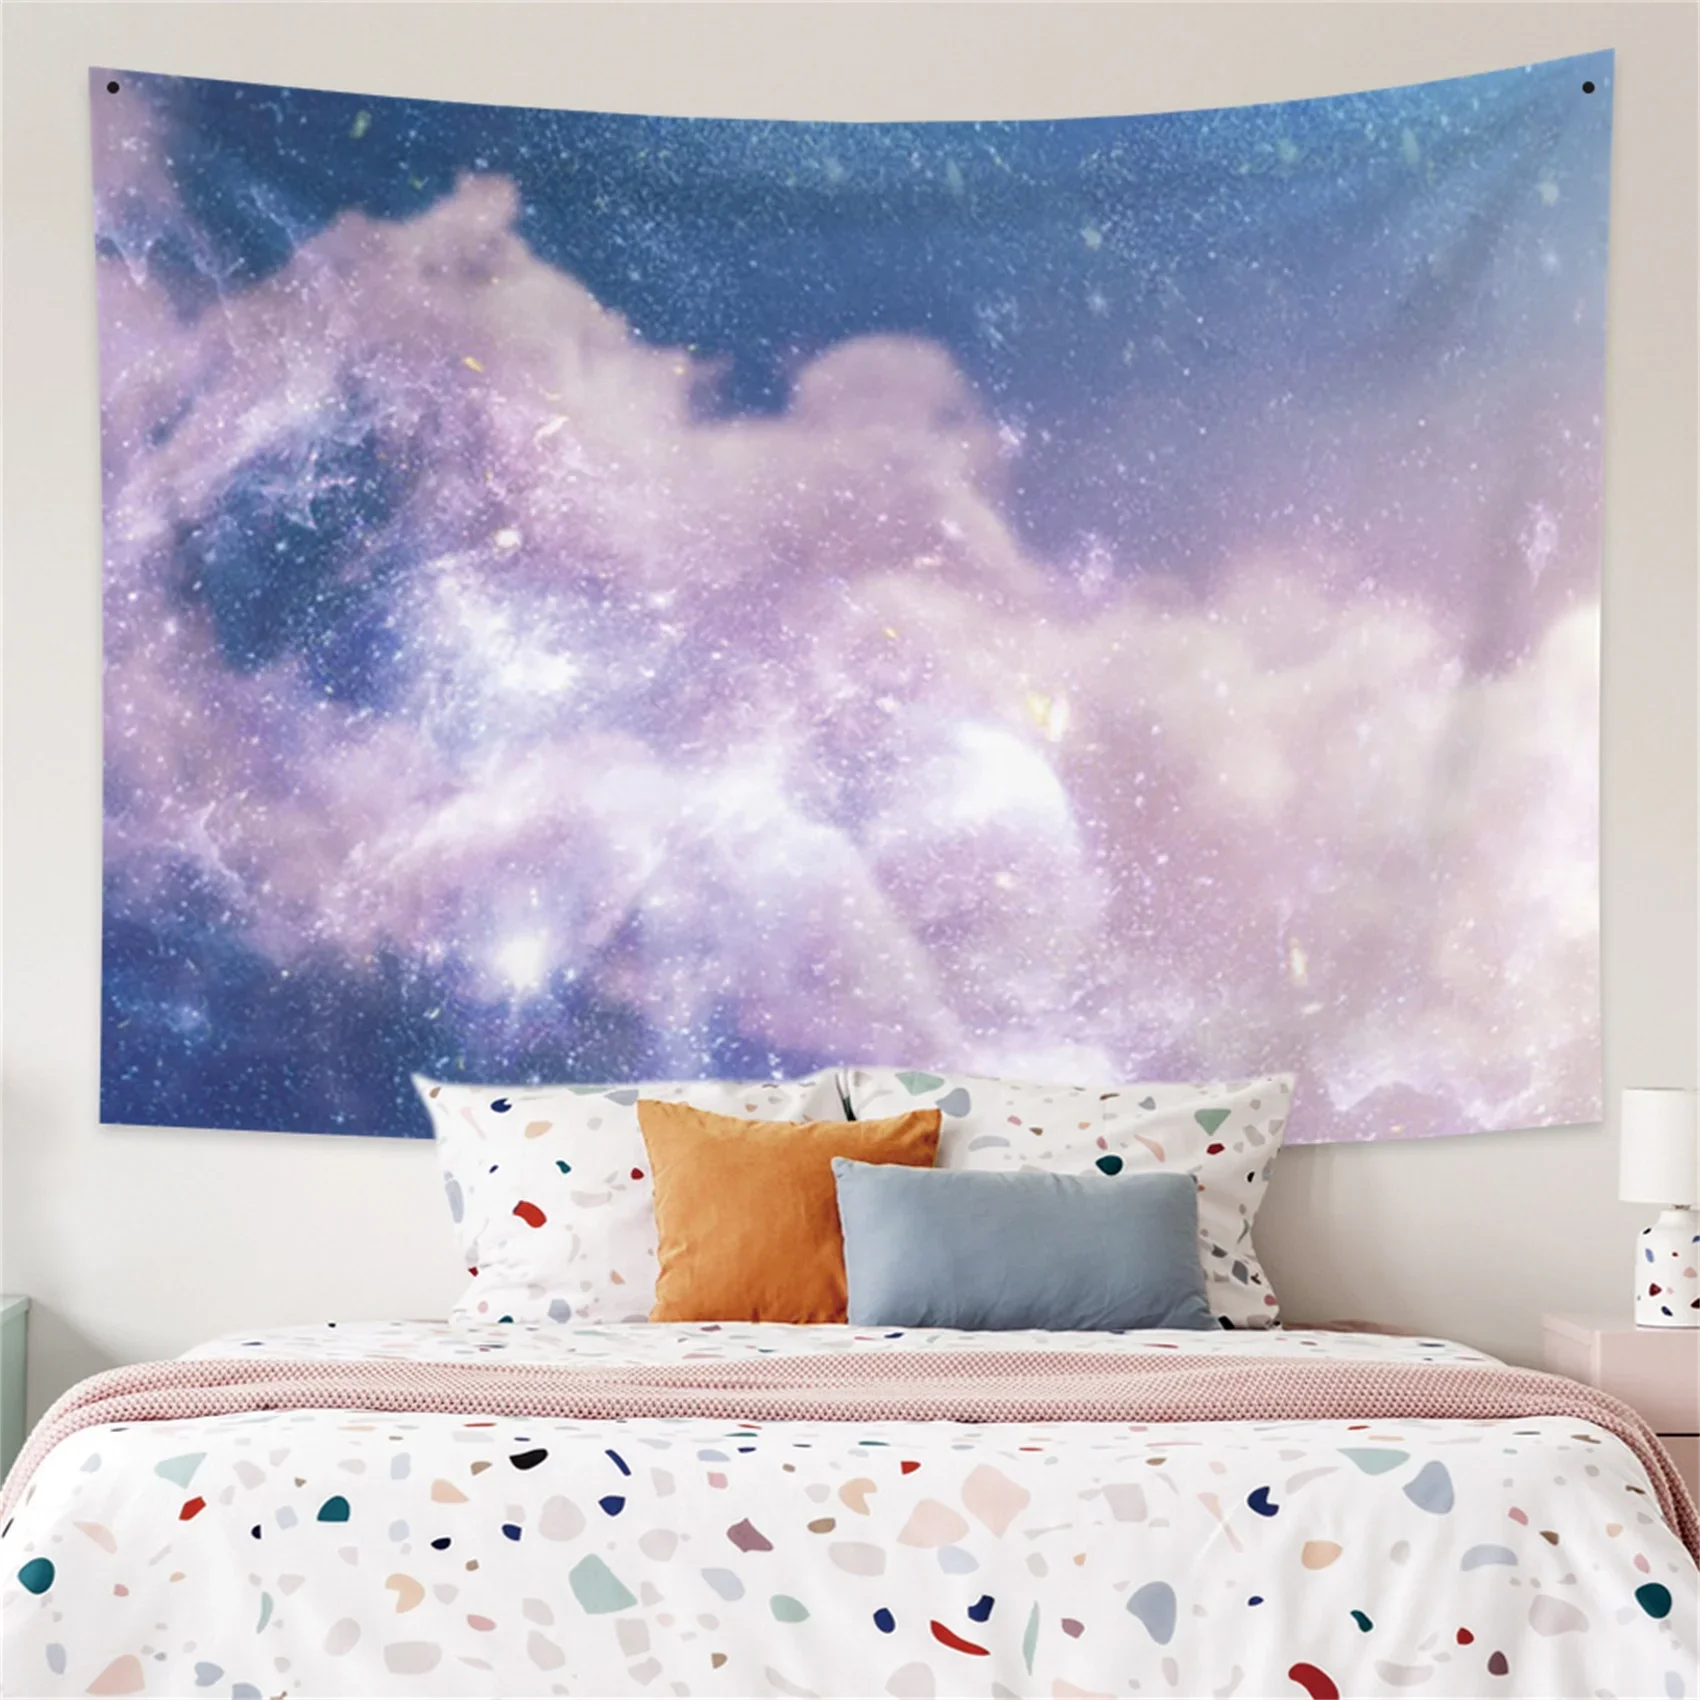 

Pink Blue Sky Cloud Tapestry Wall Hanging Cute Decor Tapestry for Living Room Bedroom Home Aestheticism Warm Bedroom Decorations